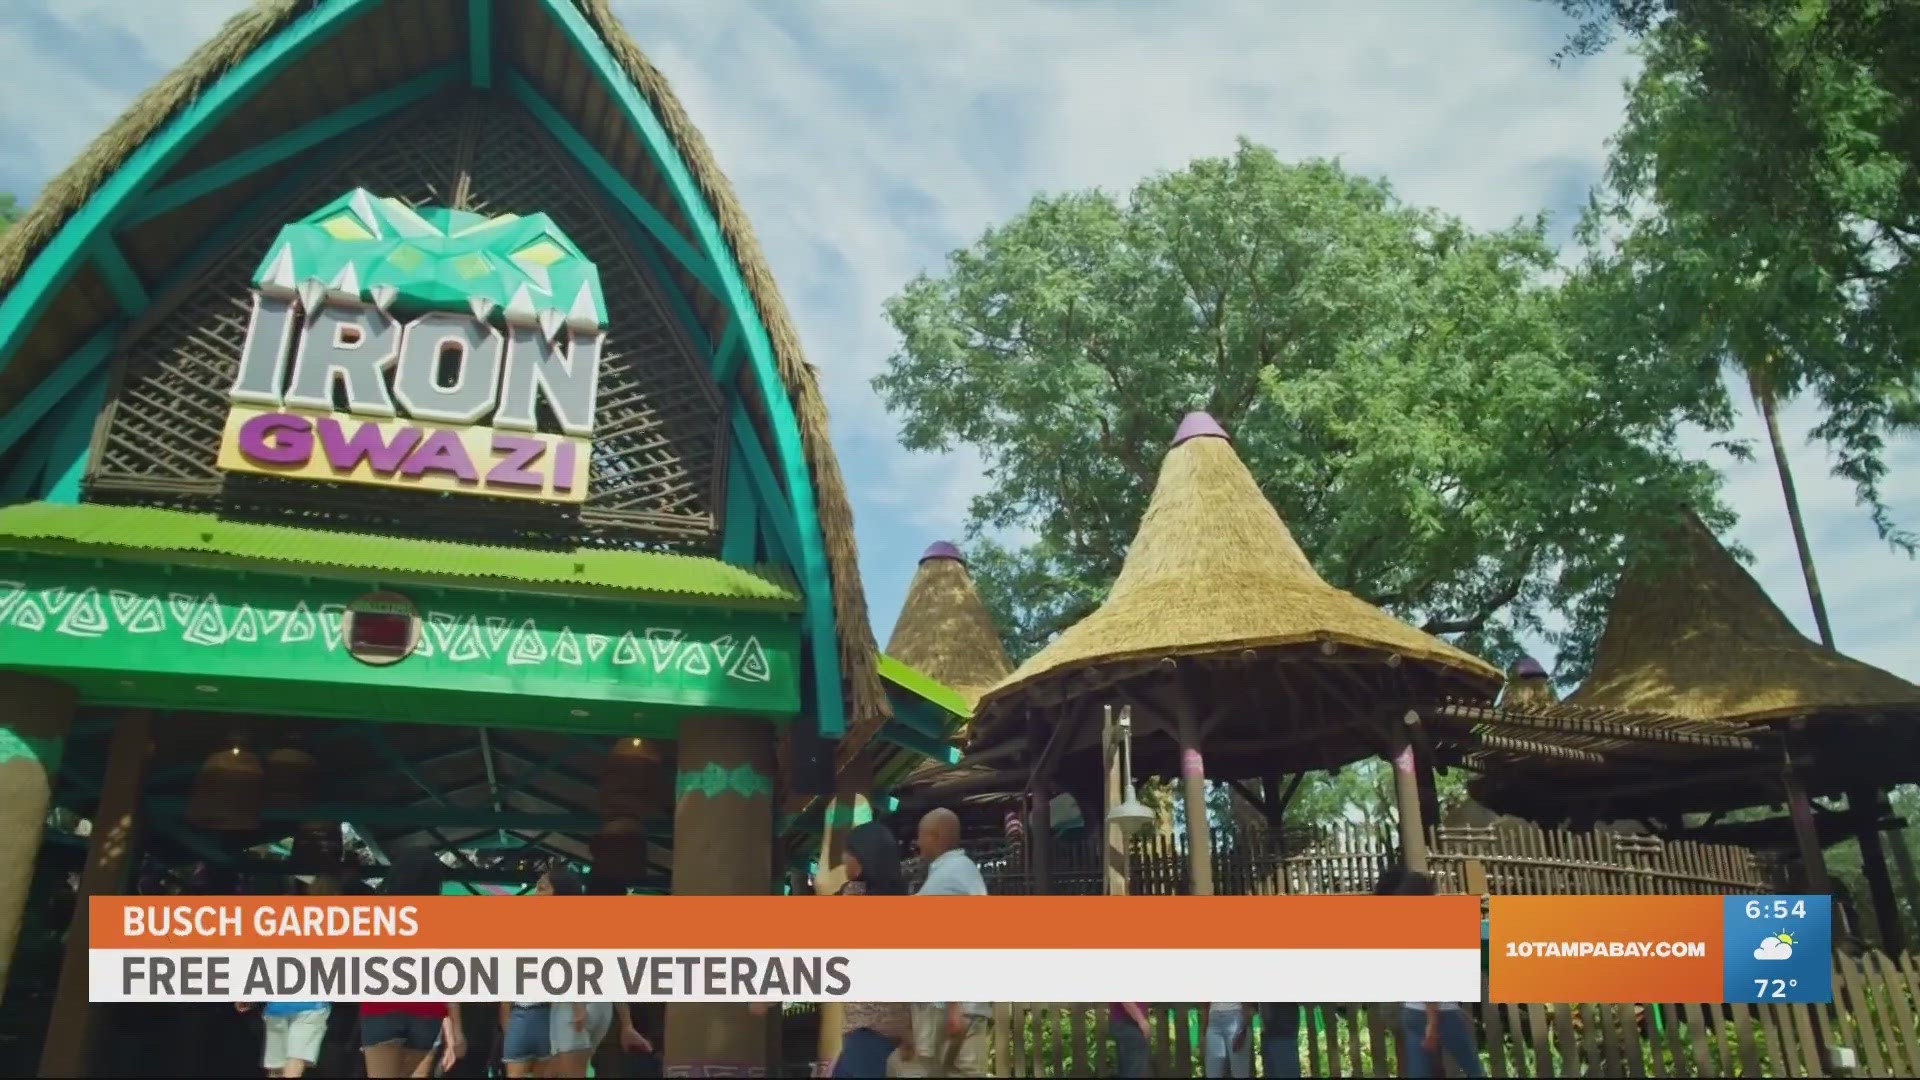 This deal that runs through July 9 for veterans is the amusement park's way of honoring Military Appreciation Month.